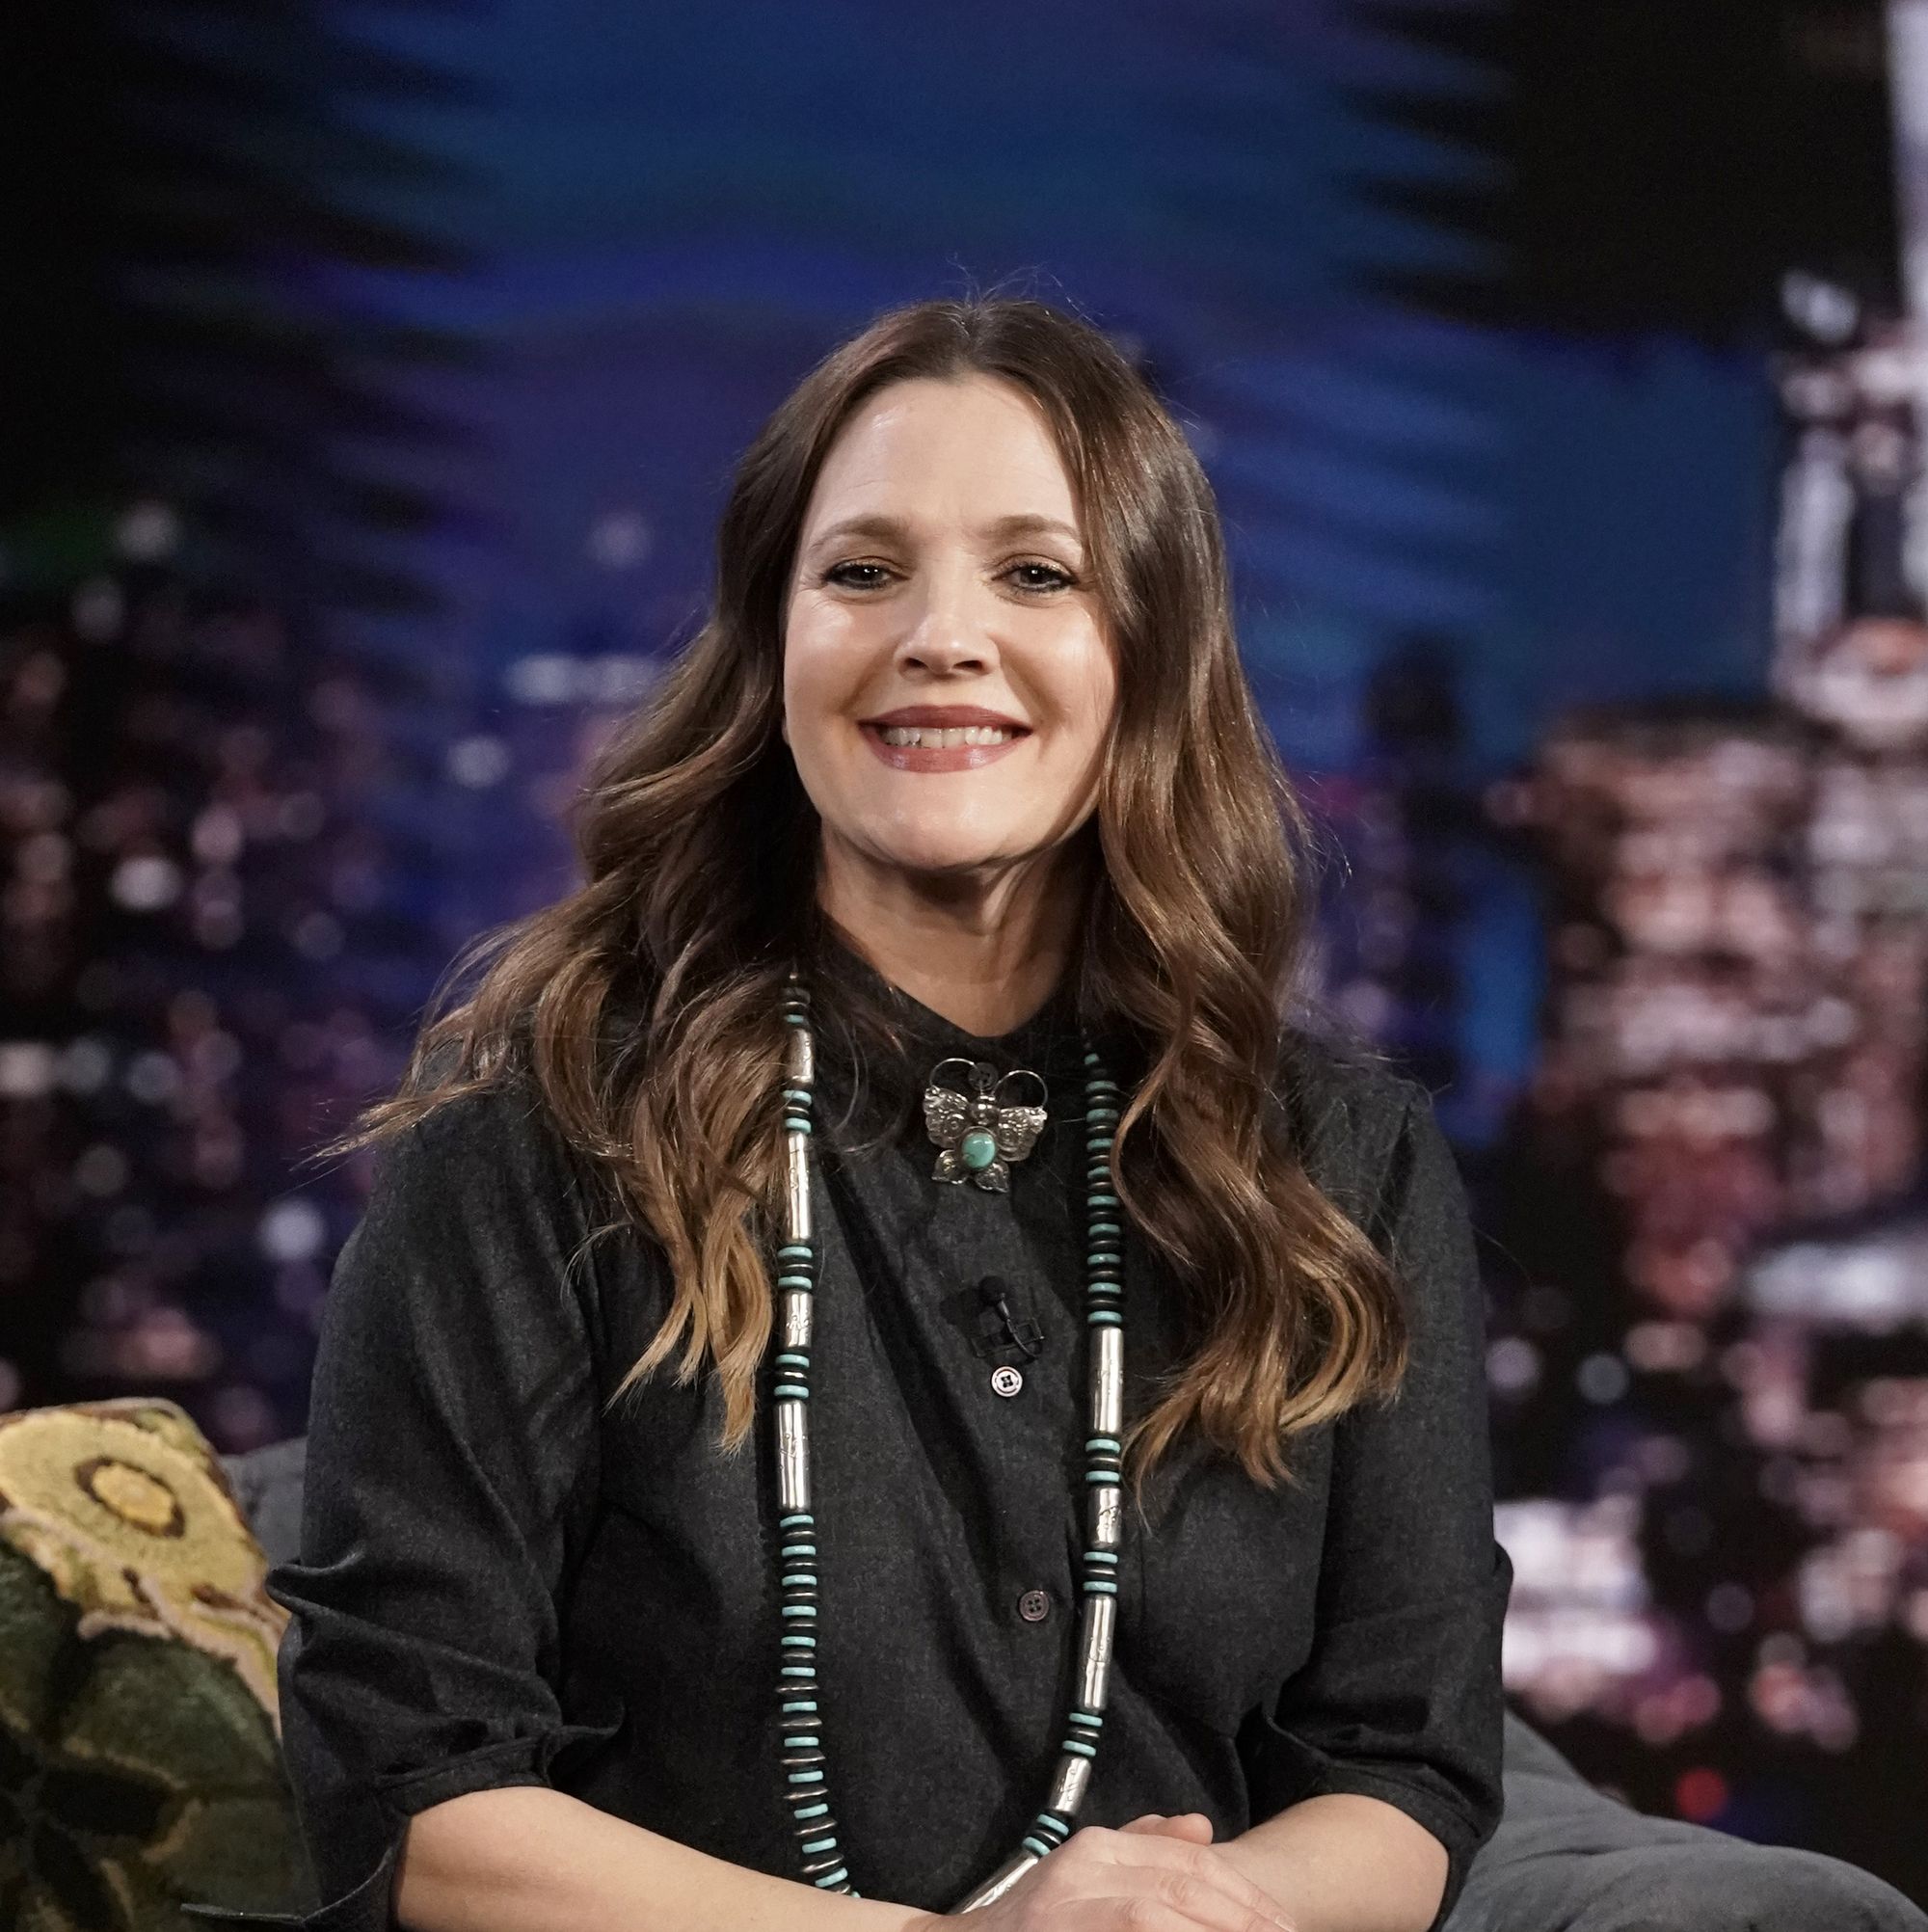 Drew Barrymore Opens Up About Her 